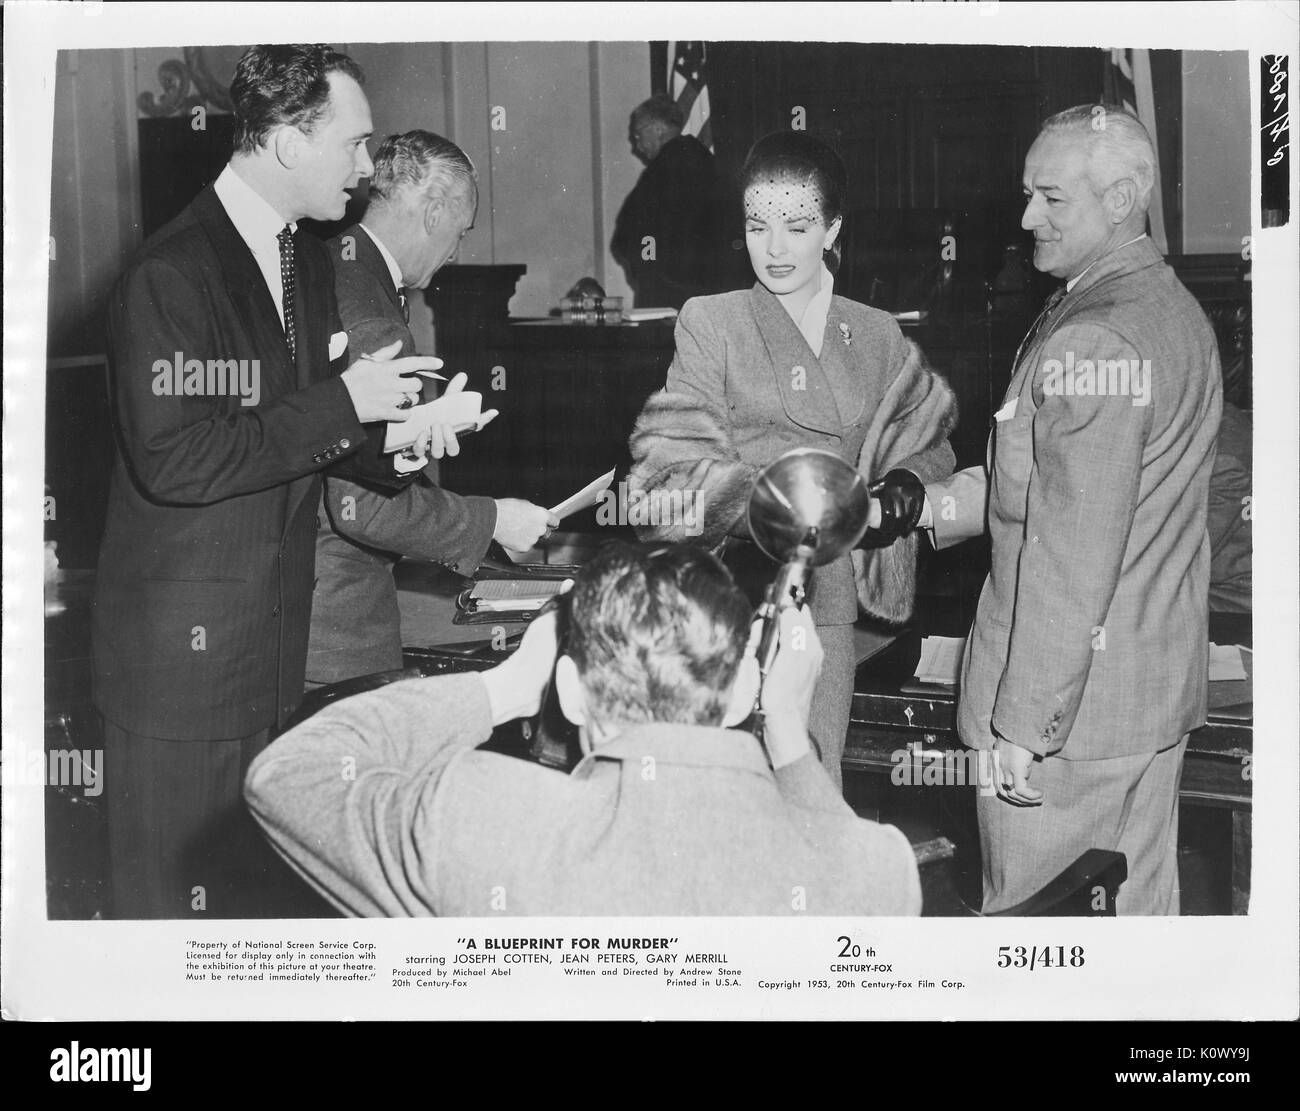 A movie still scene from 'A Blueprint For Murder' (1953 20th Century Fox thriller film), showing an elegant woman being interviewed and photographed by some press people while she hold on to a man with white hair for moral support, 1953. Stock Photo